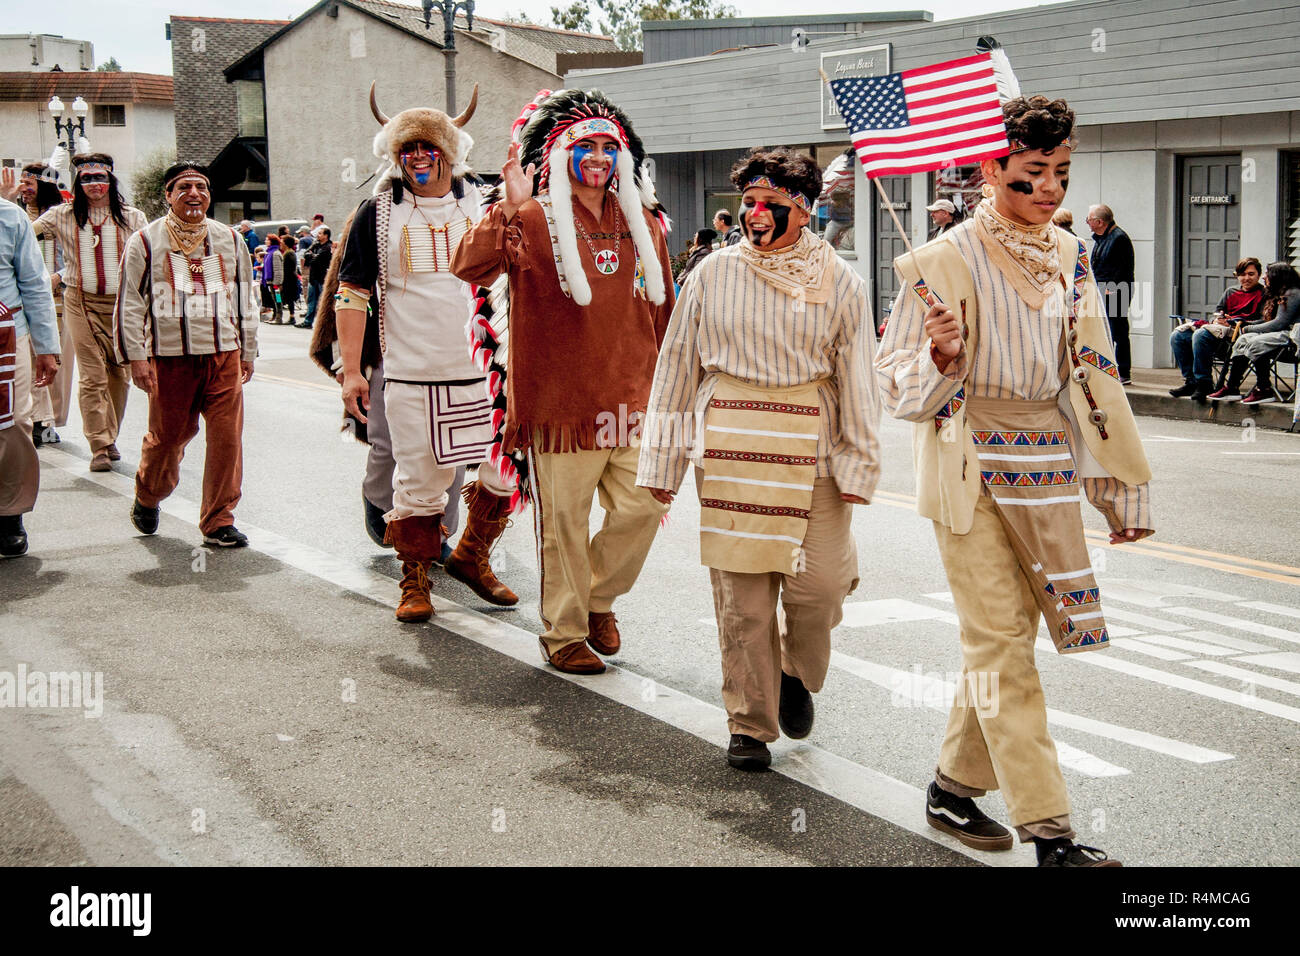 Wearing traditional clothing, a Native American contingent of Buffalo Bill's Wild West and Congress of Rough Riders of the World proudly carries the US flag during a Memorial Day festival in Laguna Beach, CA. Stock Photo